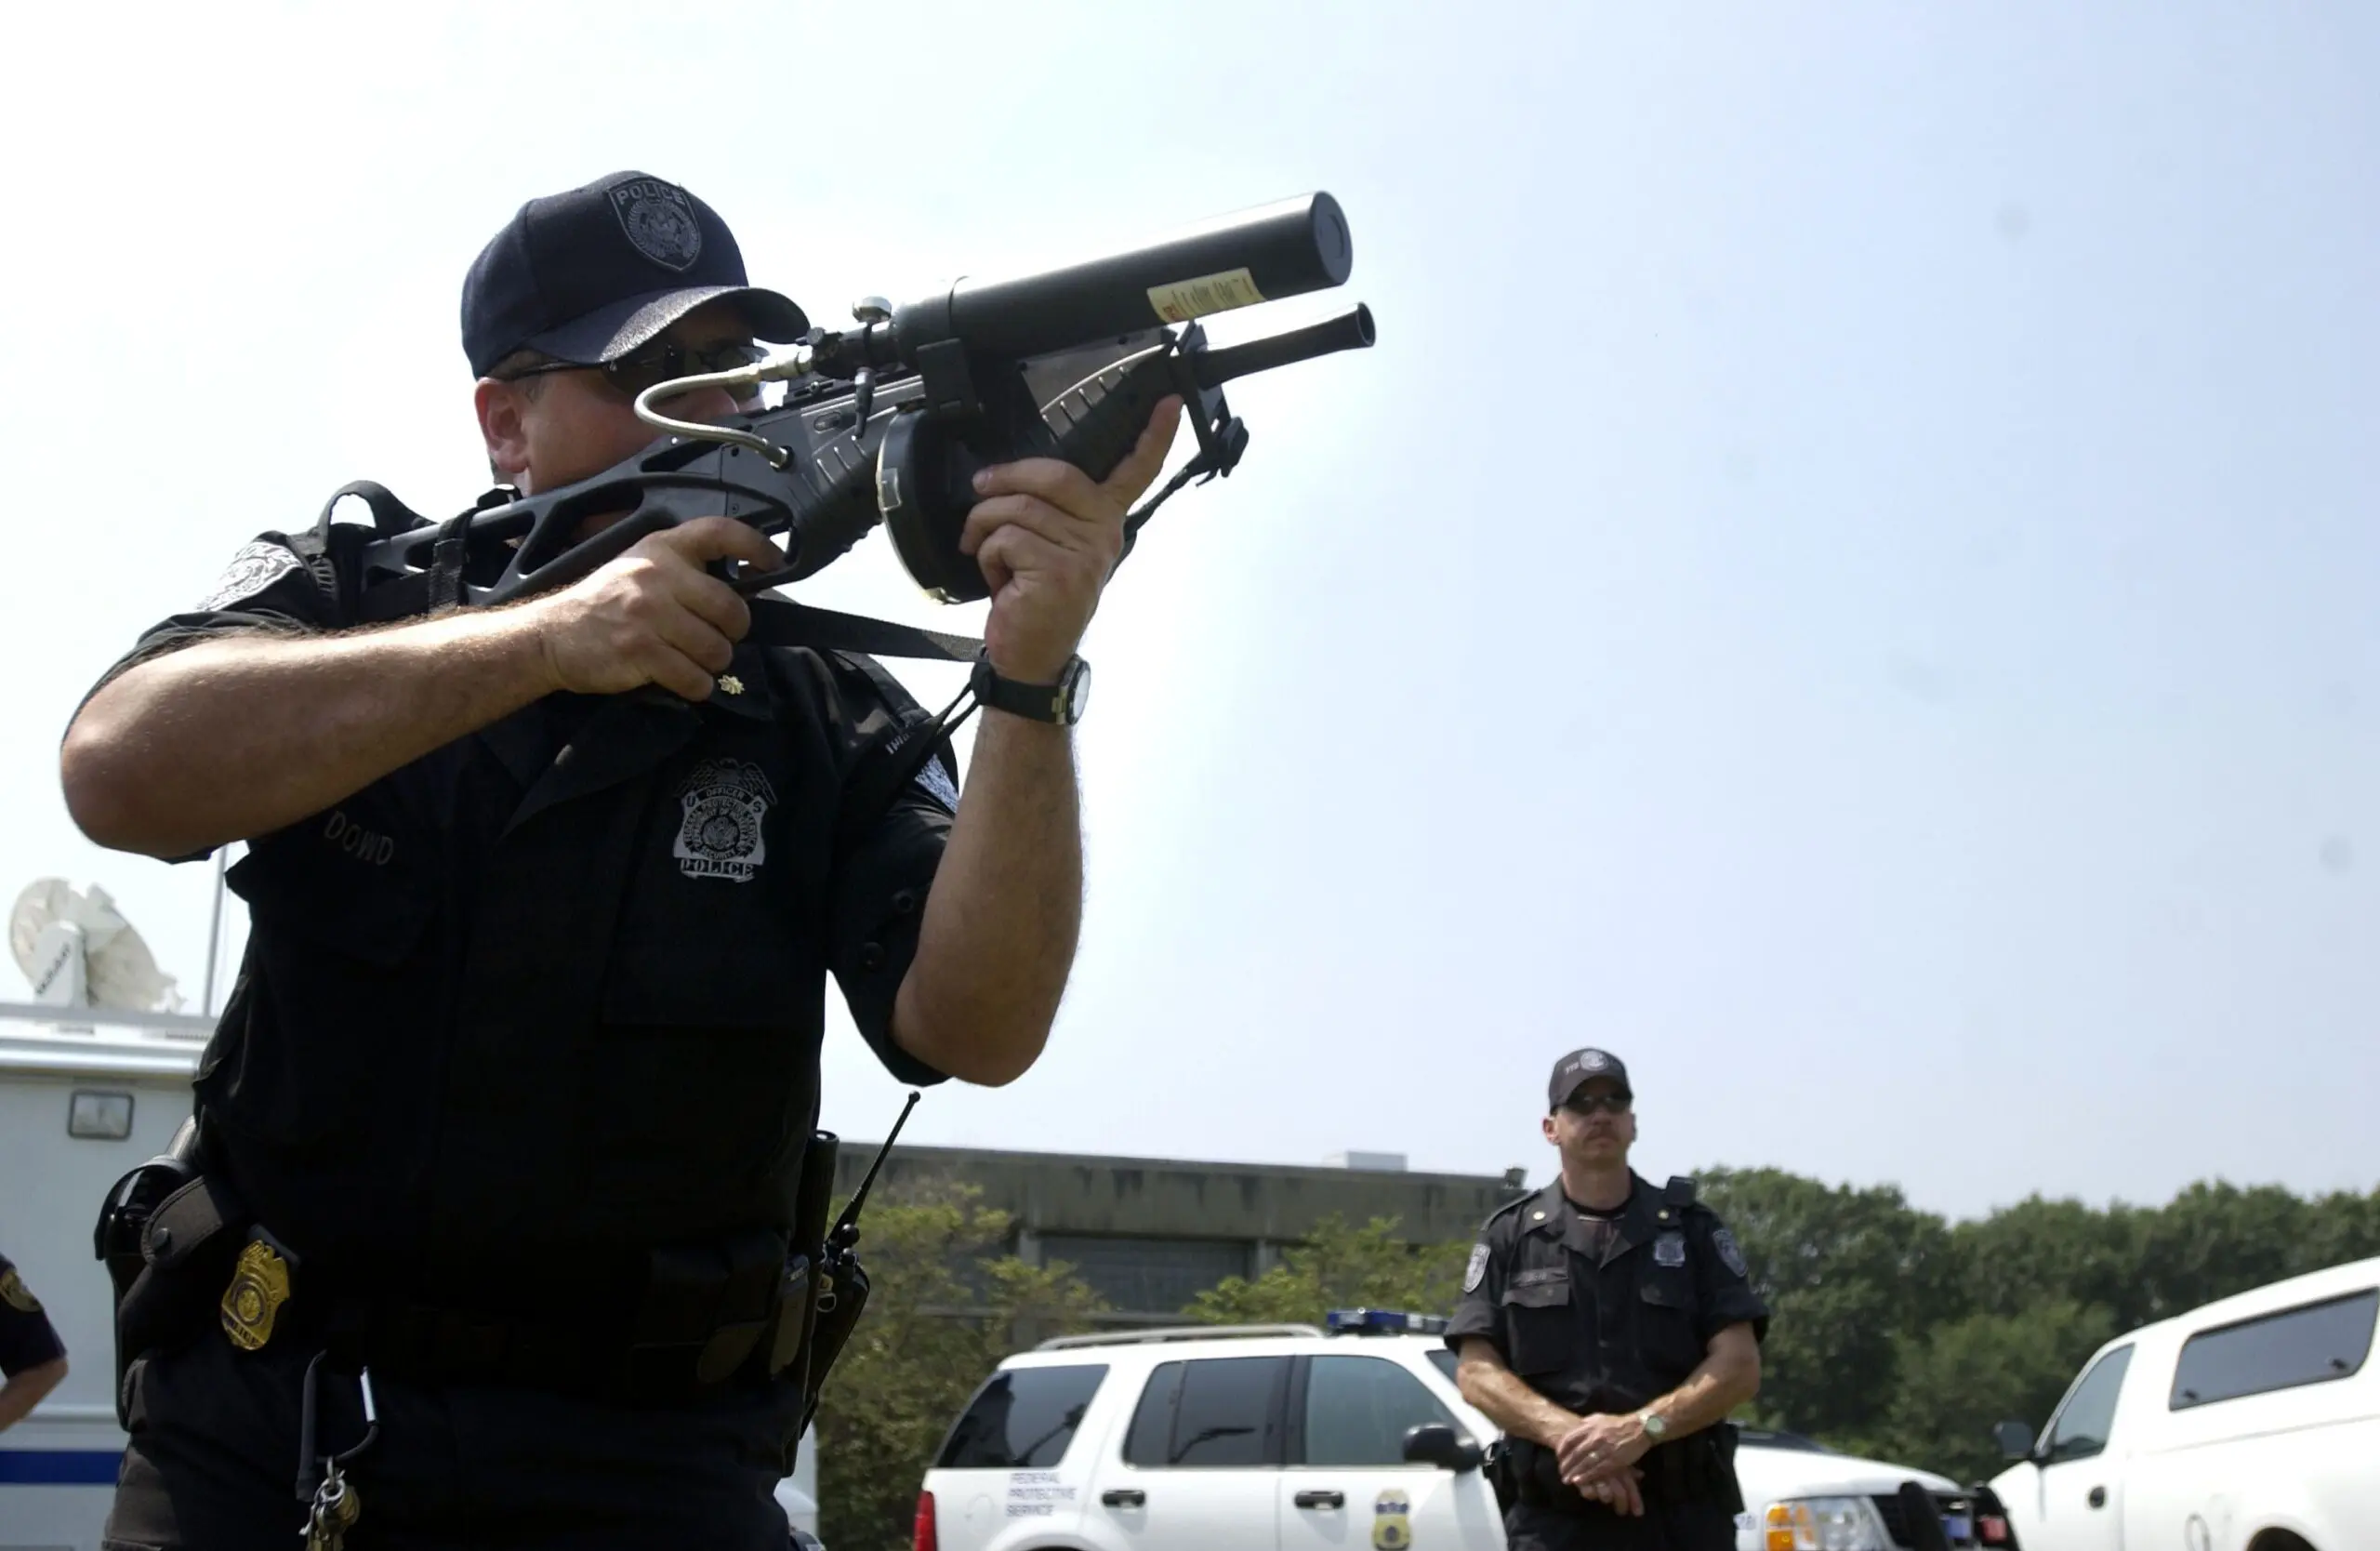 A Federal Protective Service officer fires an FN303 launcher.